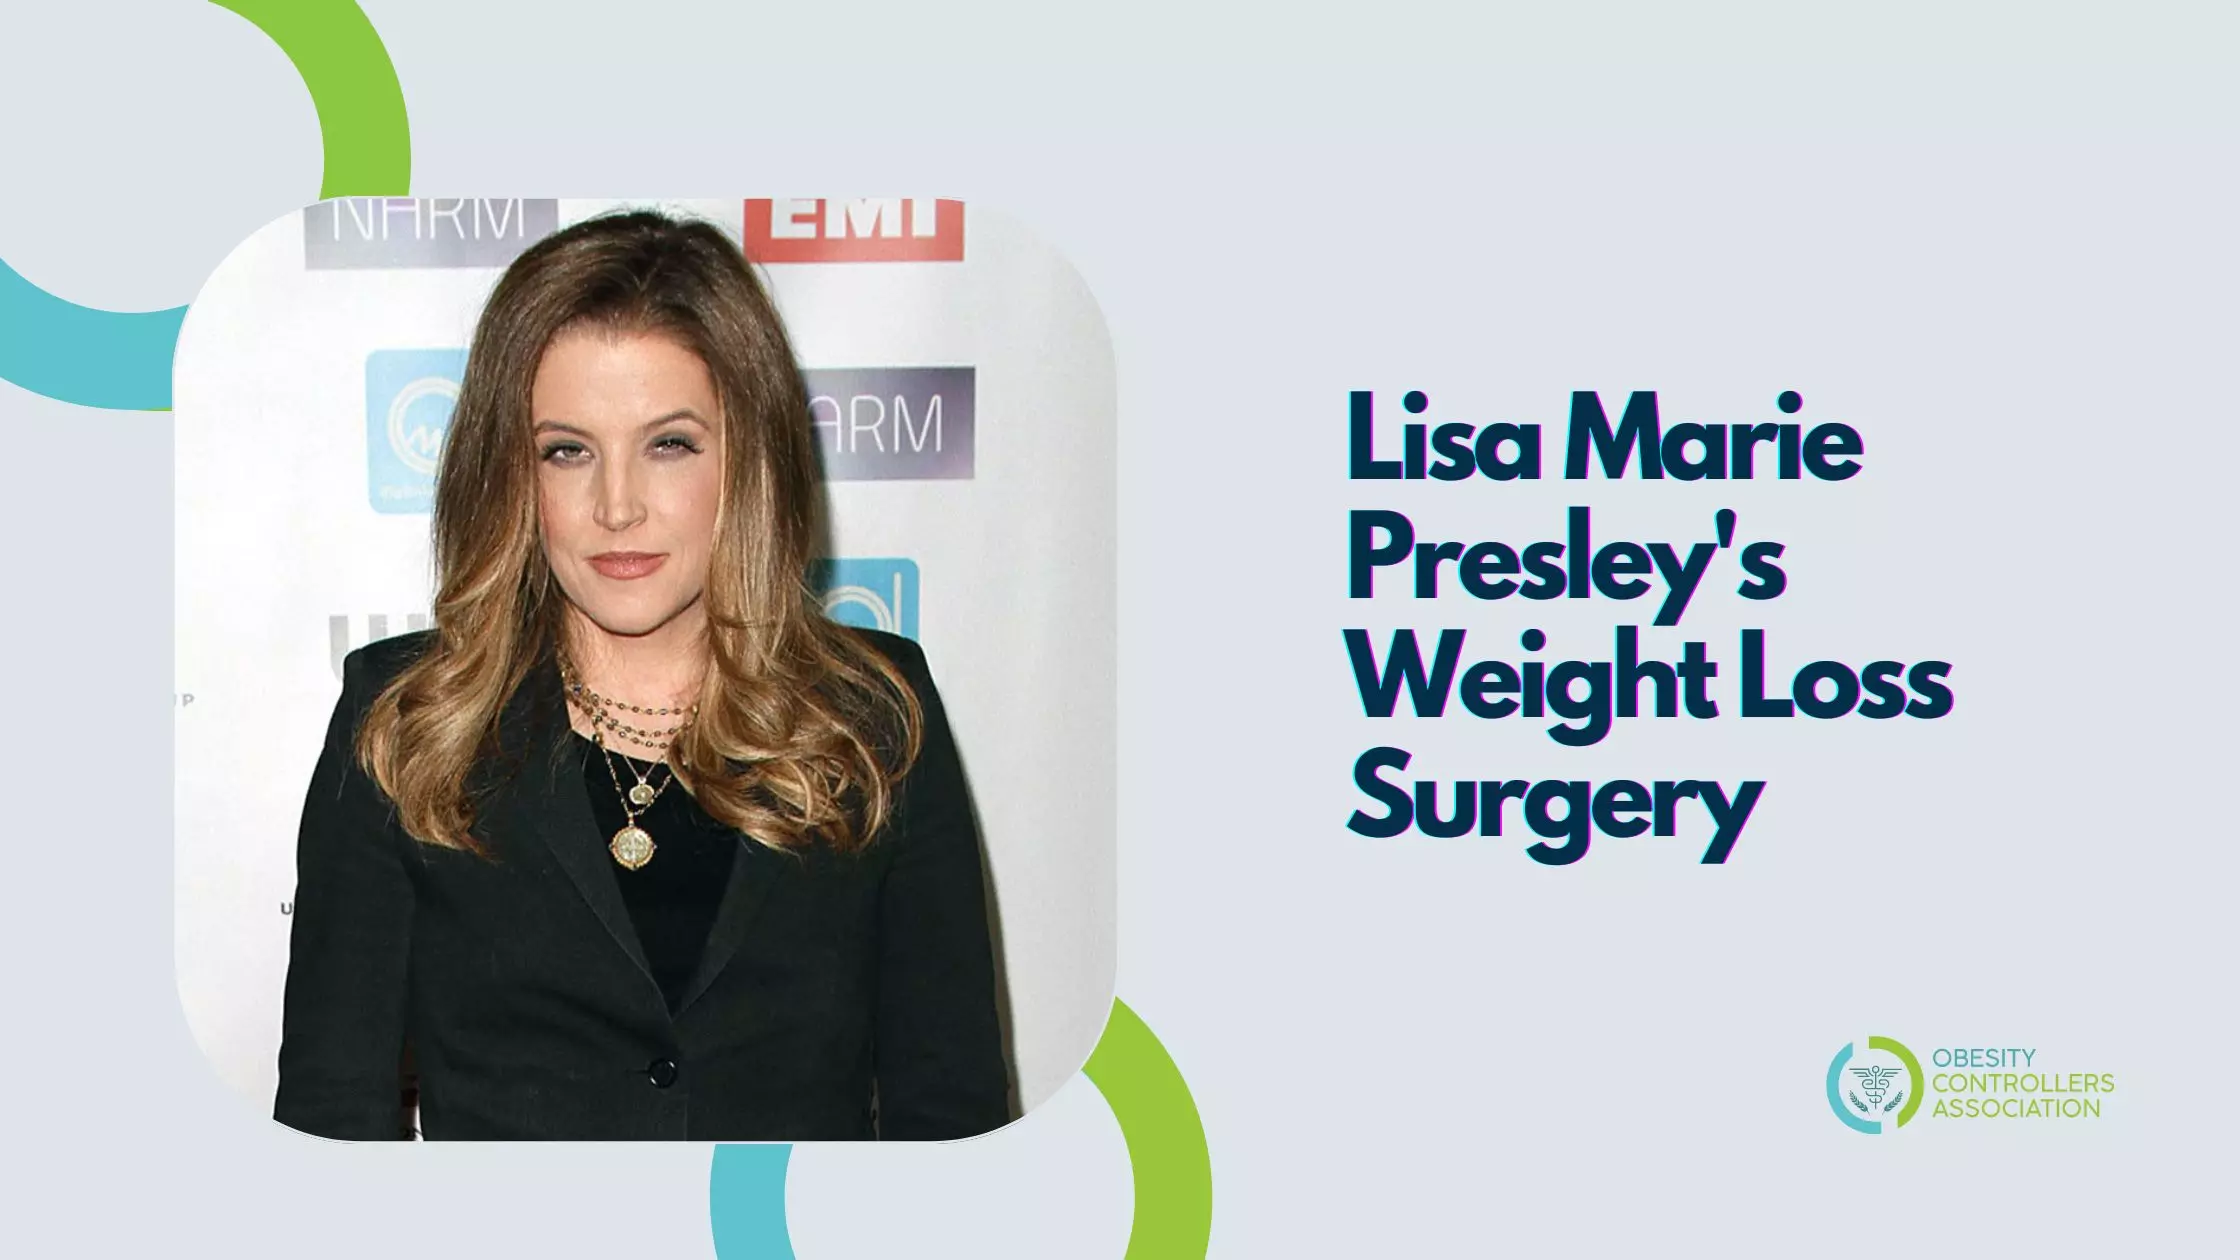 Lisa Marie Presley's Weight Loss Surgery